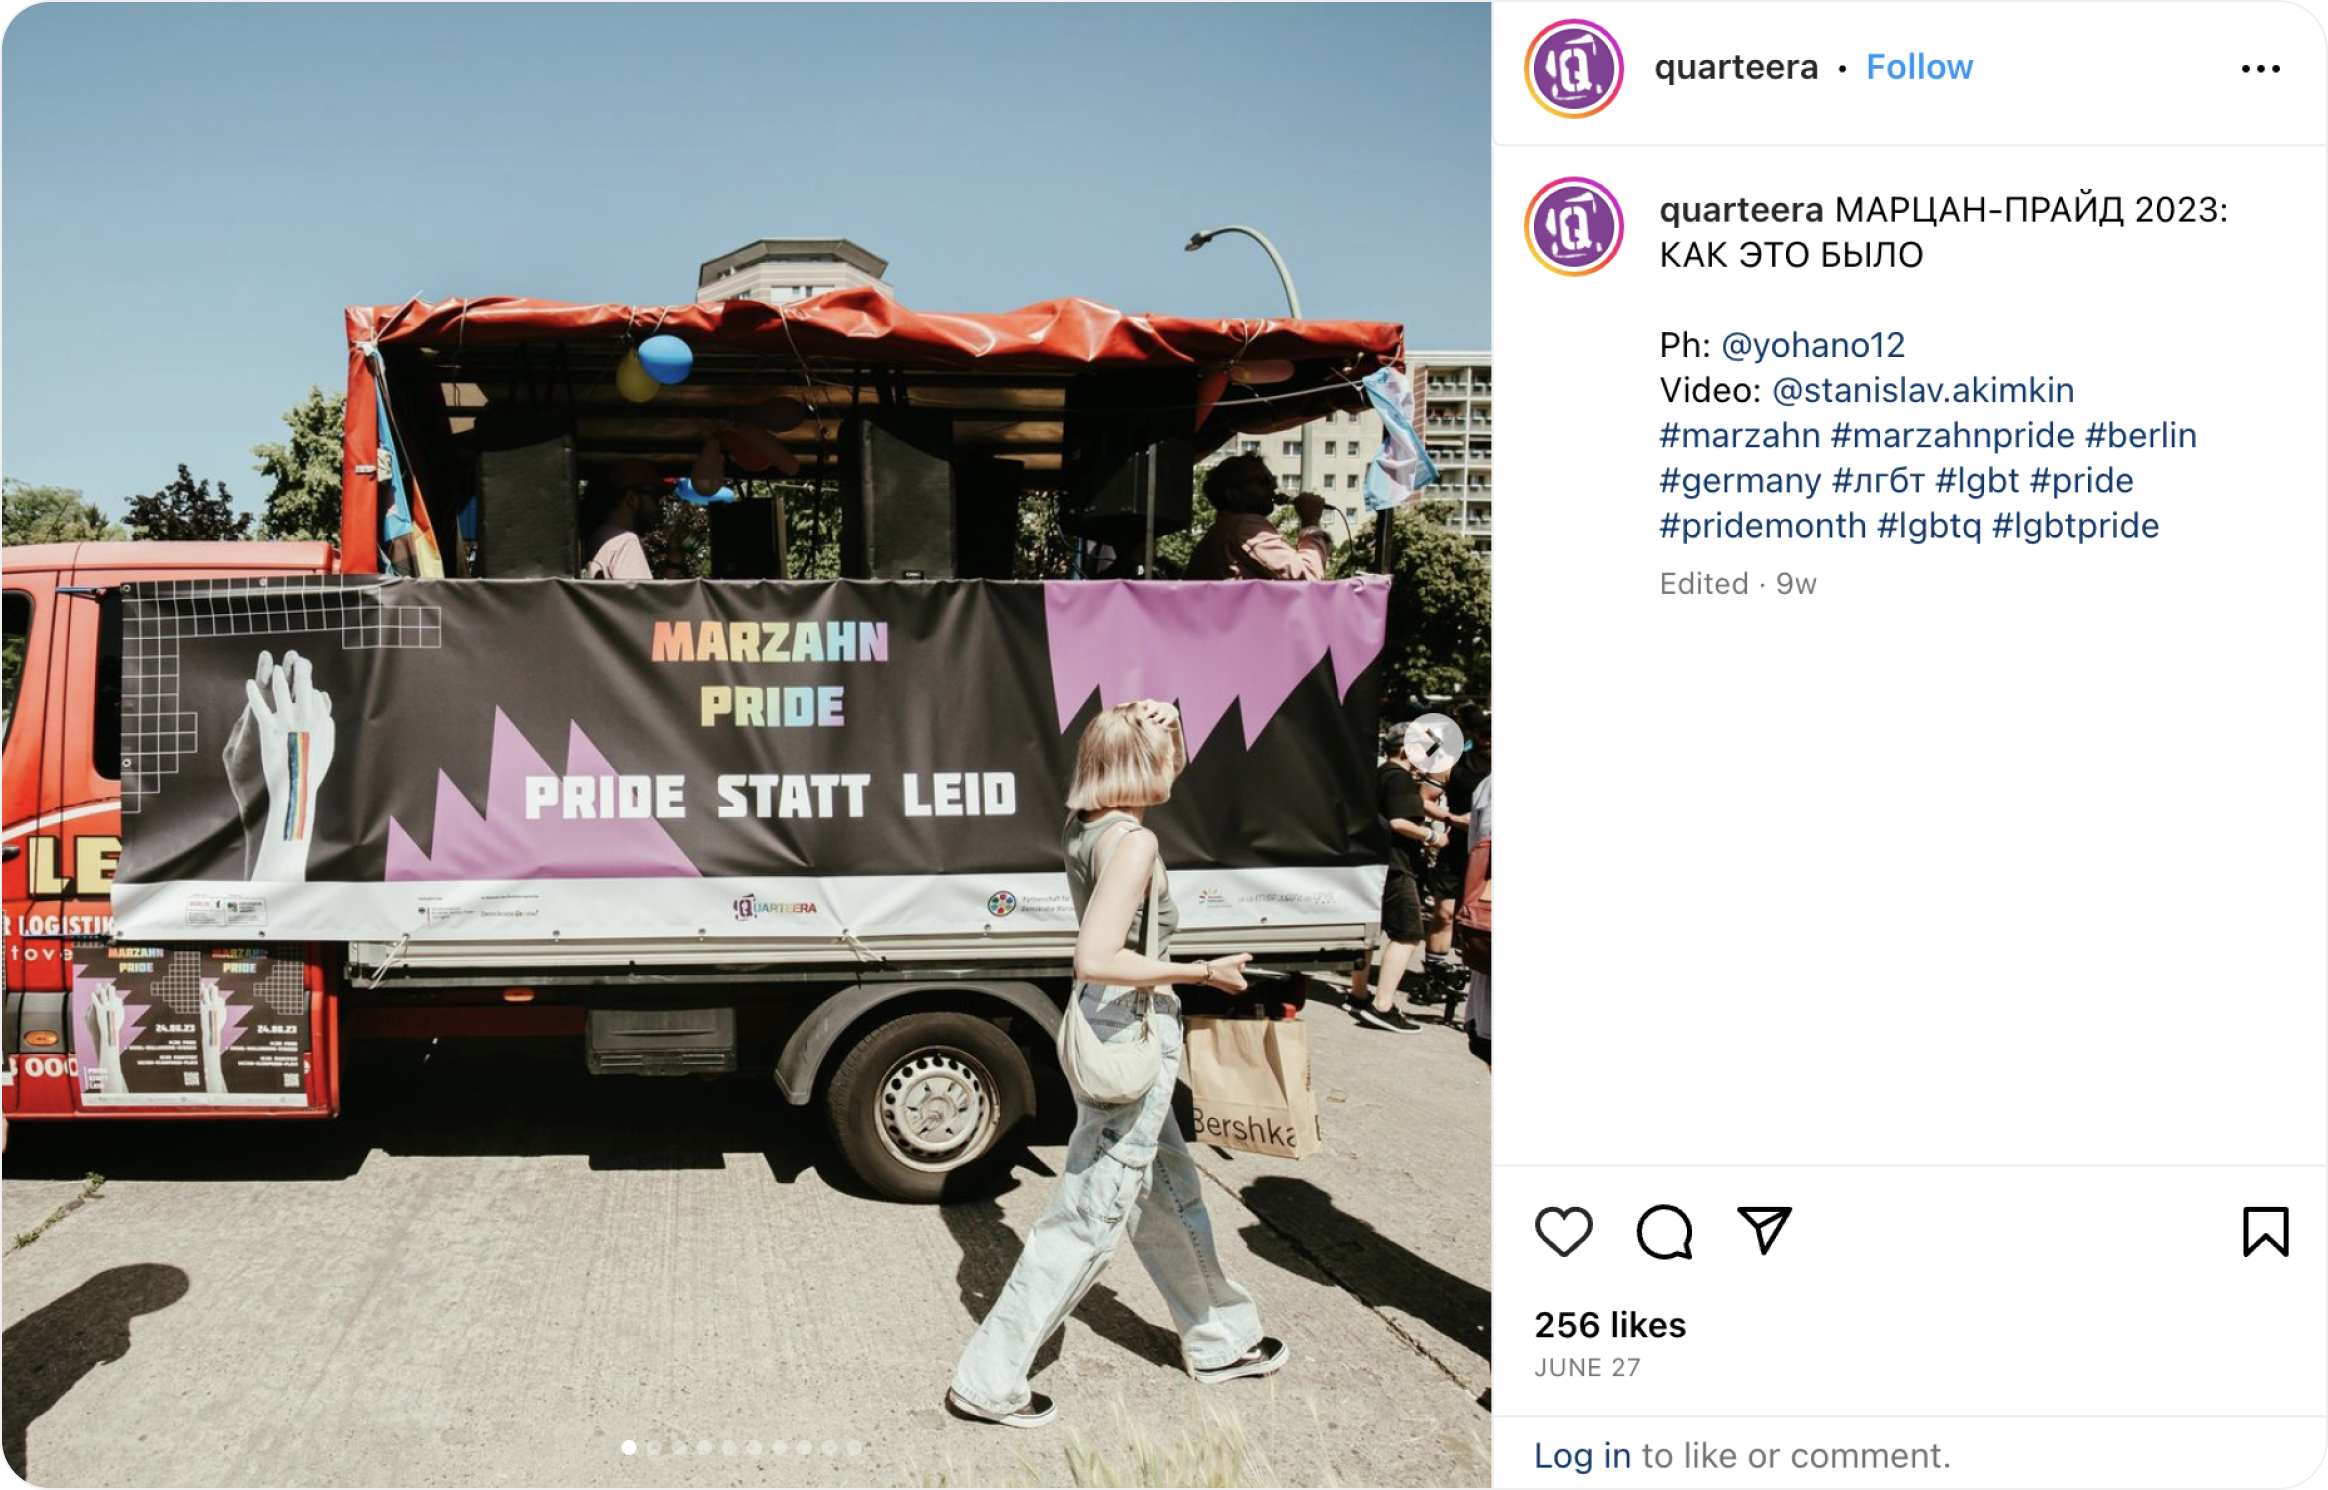 Social media post screenshot from quarteera's instagram. Shows a truck with marzahn pride banner